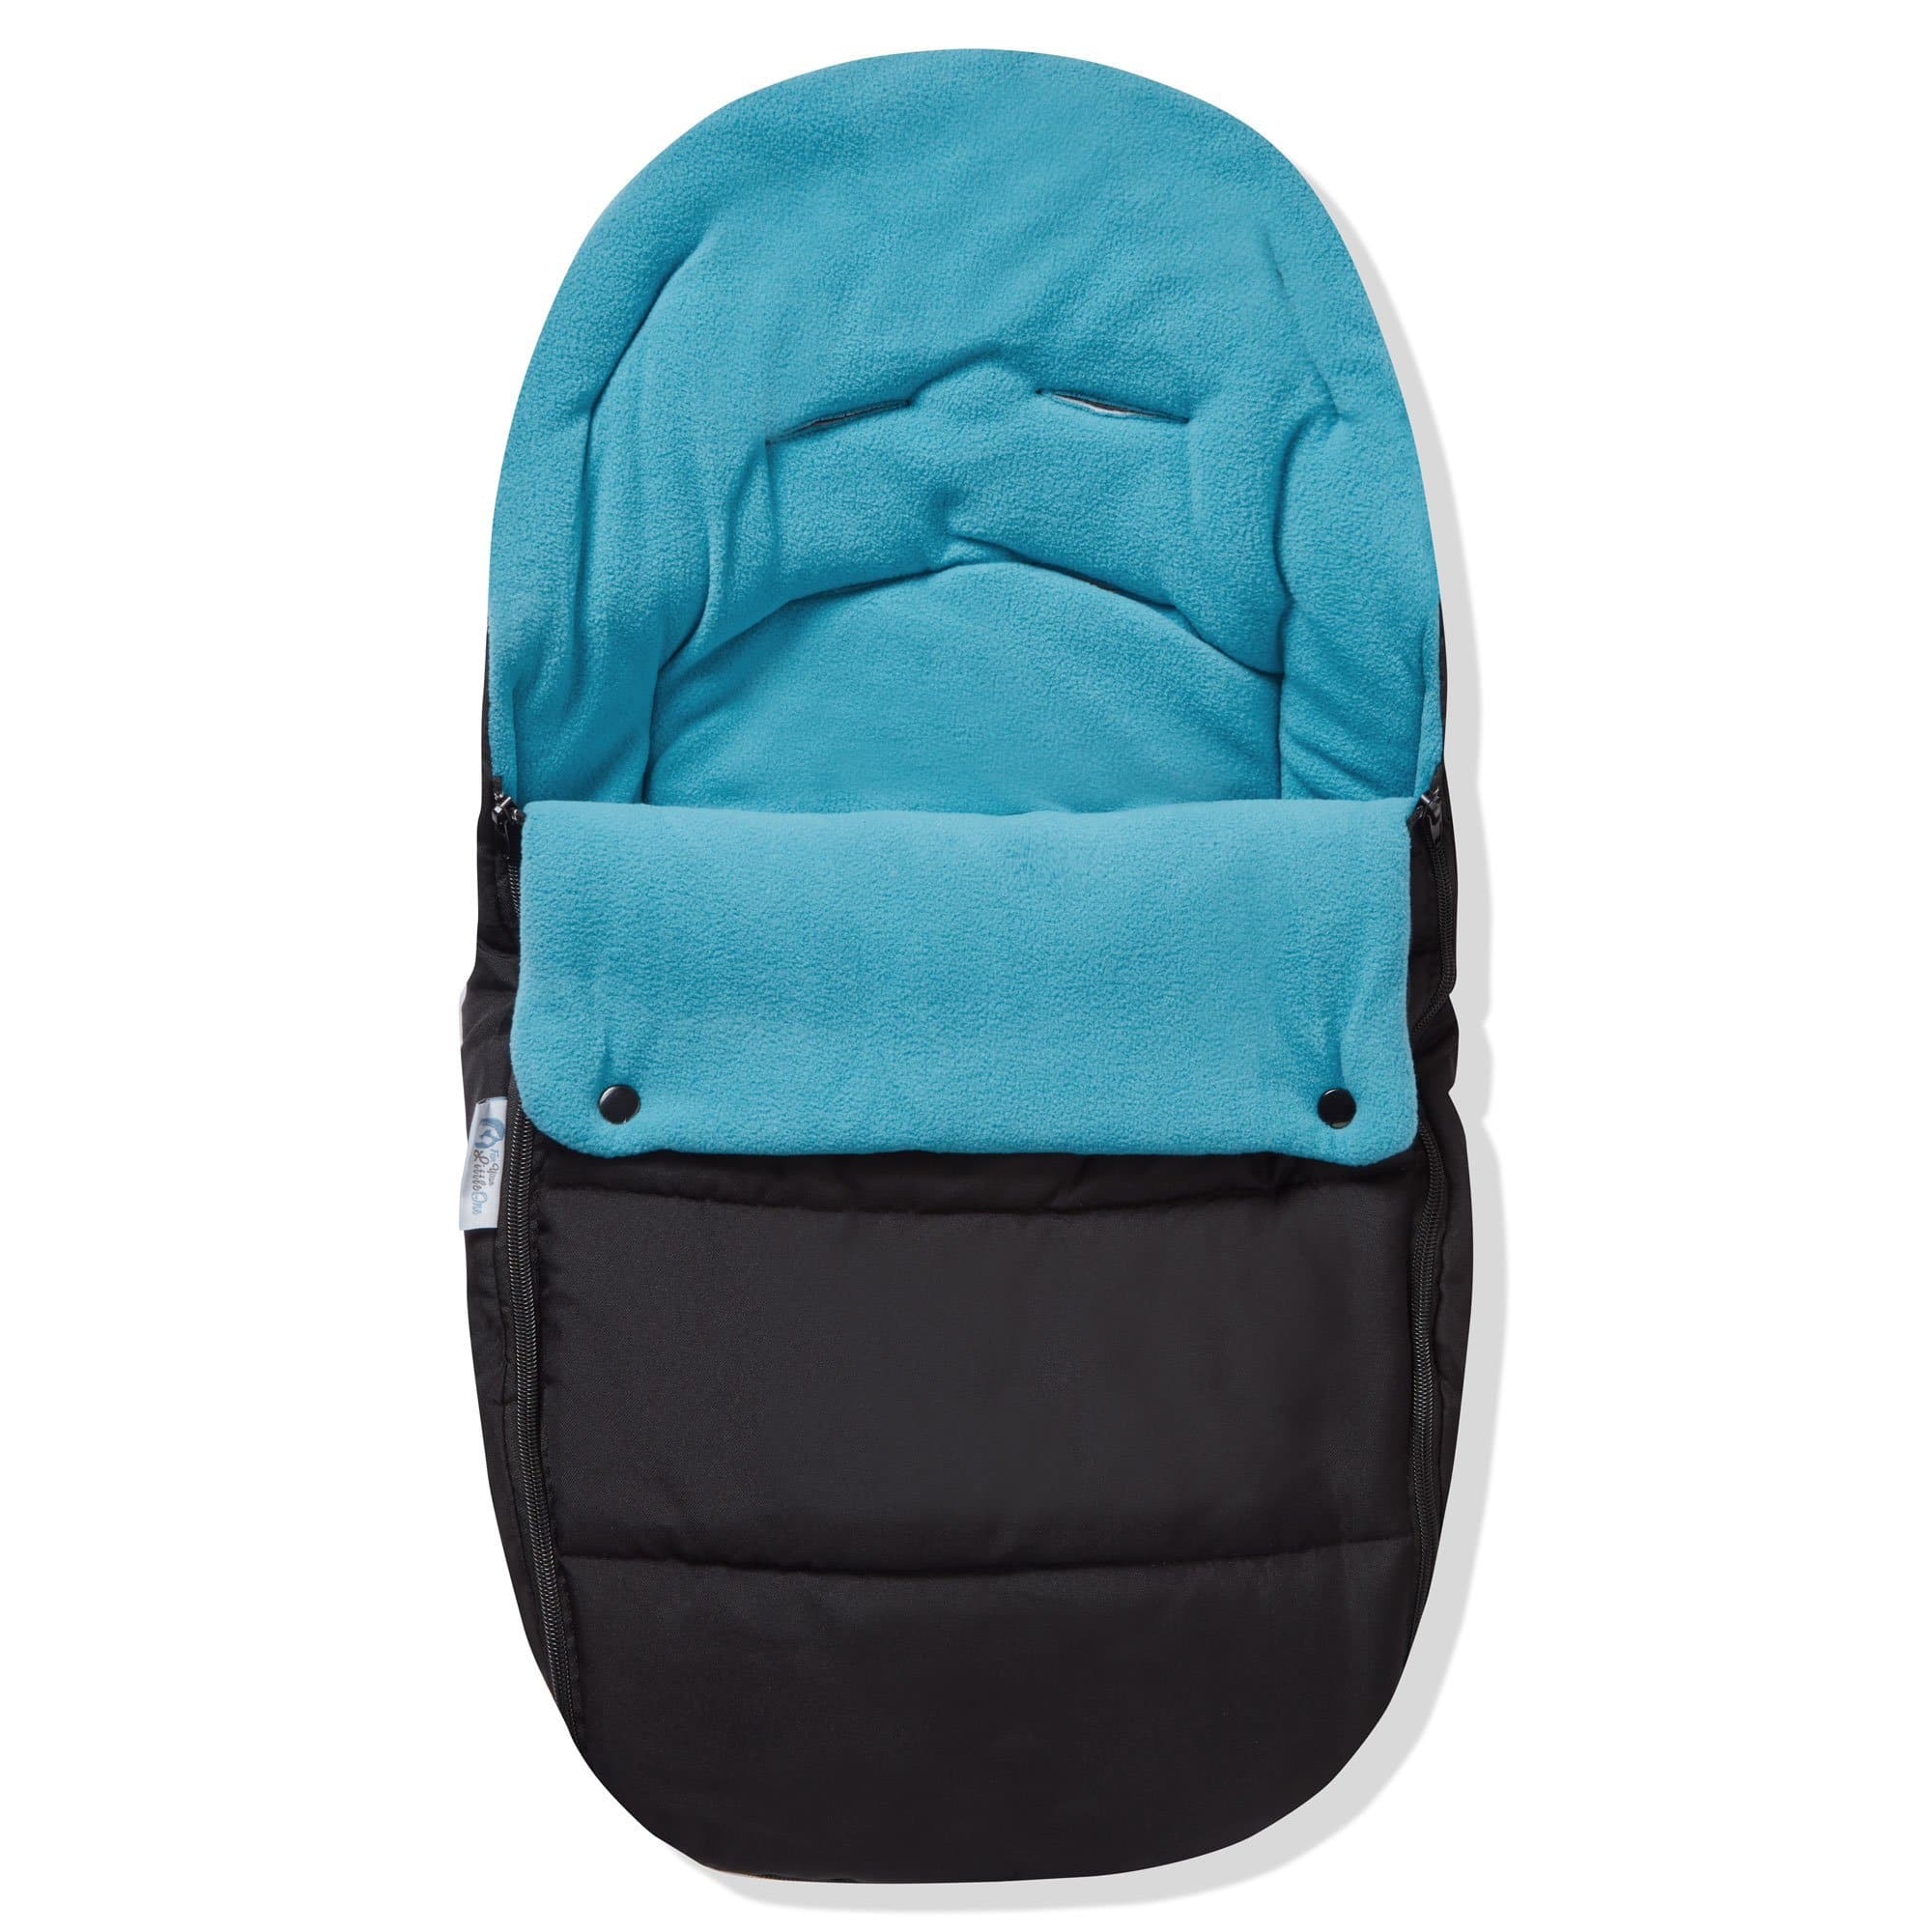 Premium Car Seat Footmuff / Cosy Toes Compatible with Babylo - Ocean Blue / Fits All Models | For Your Little One